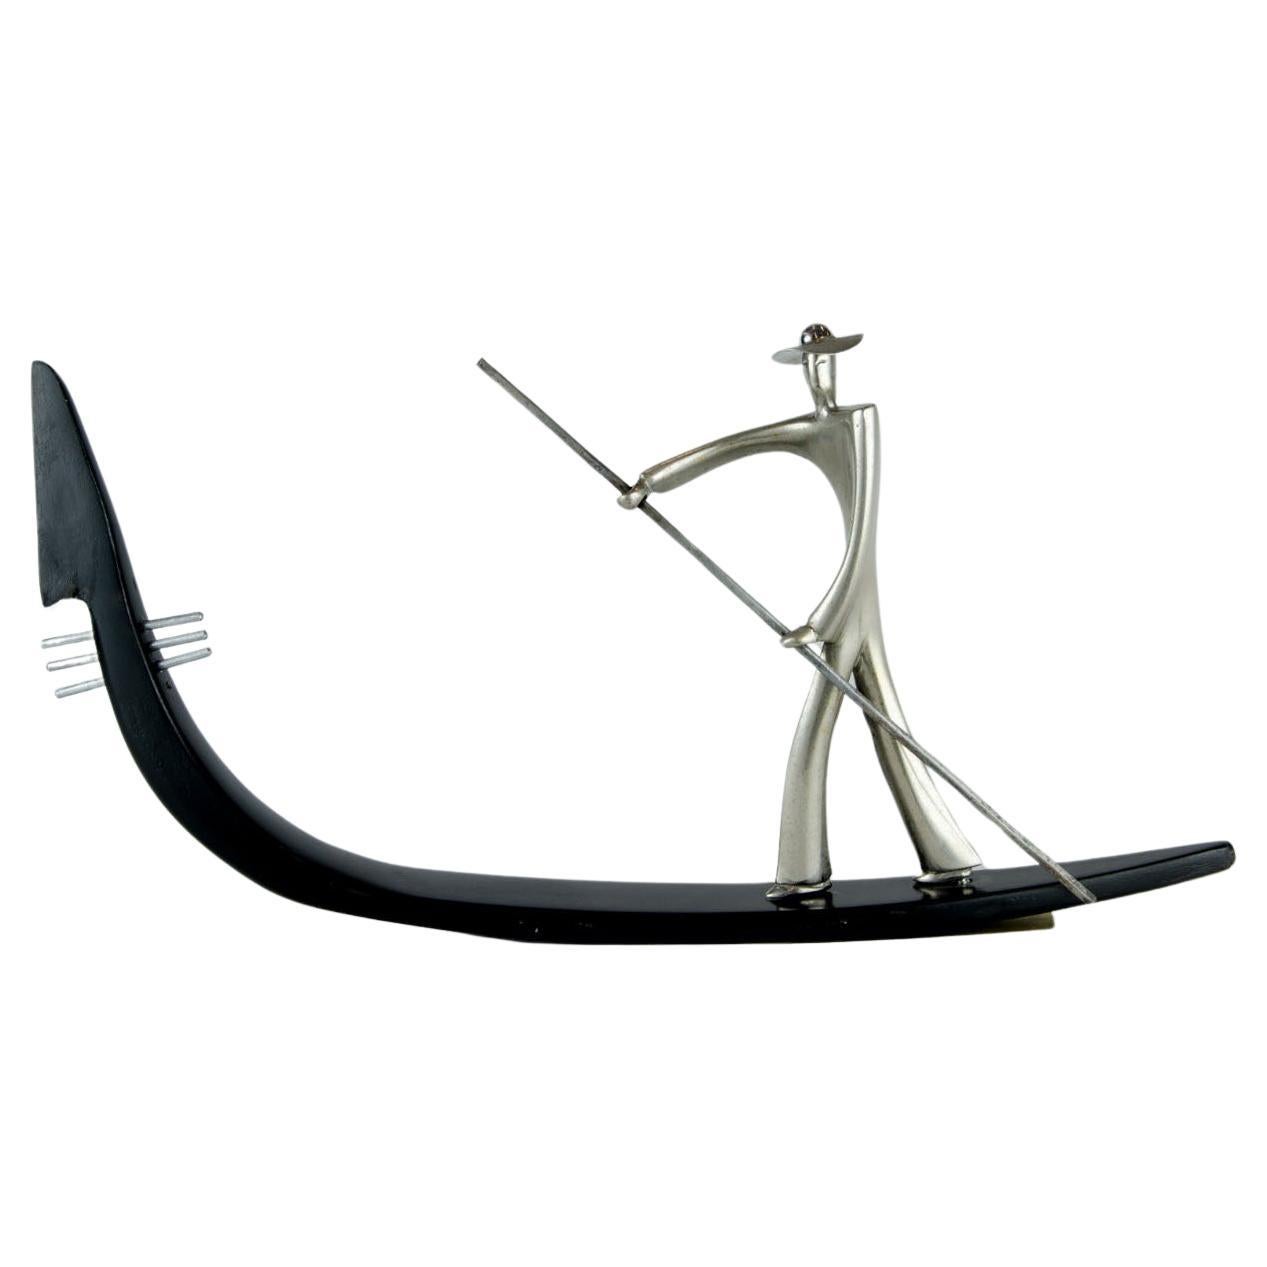 Metal gondola sculpture in the Karl Hagenauer style. For Sale